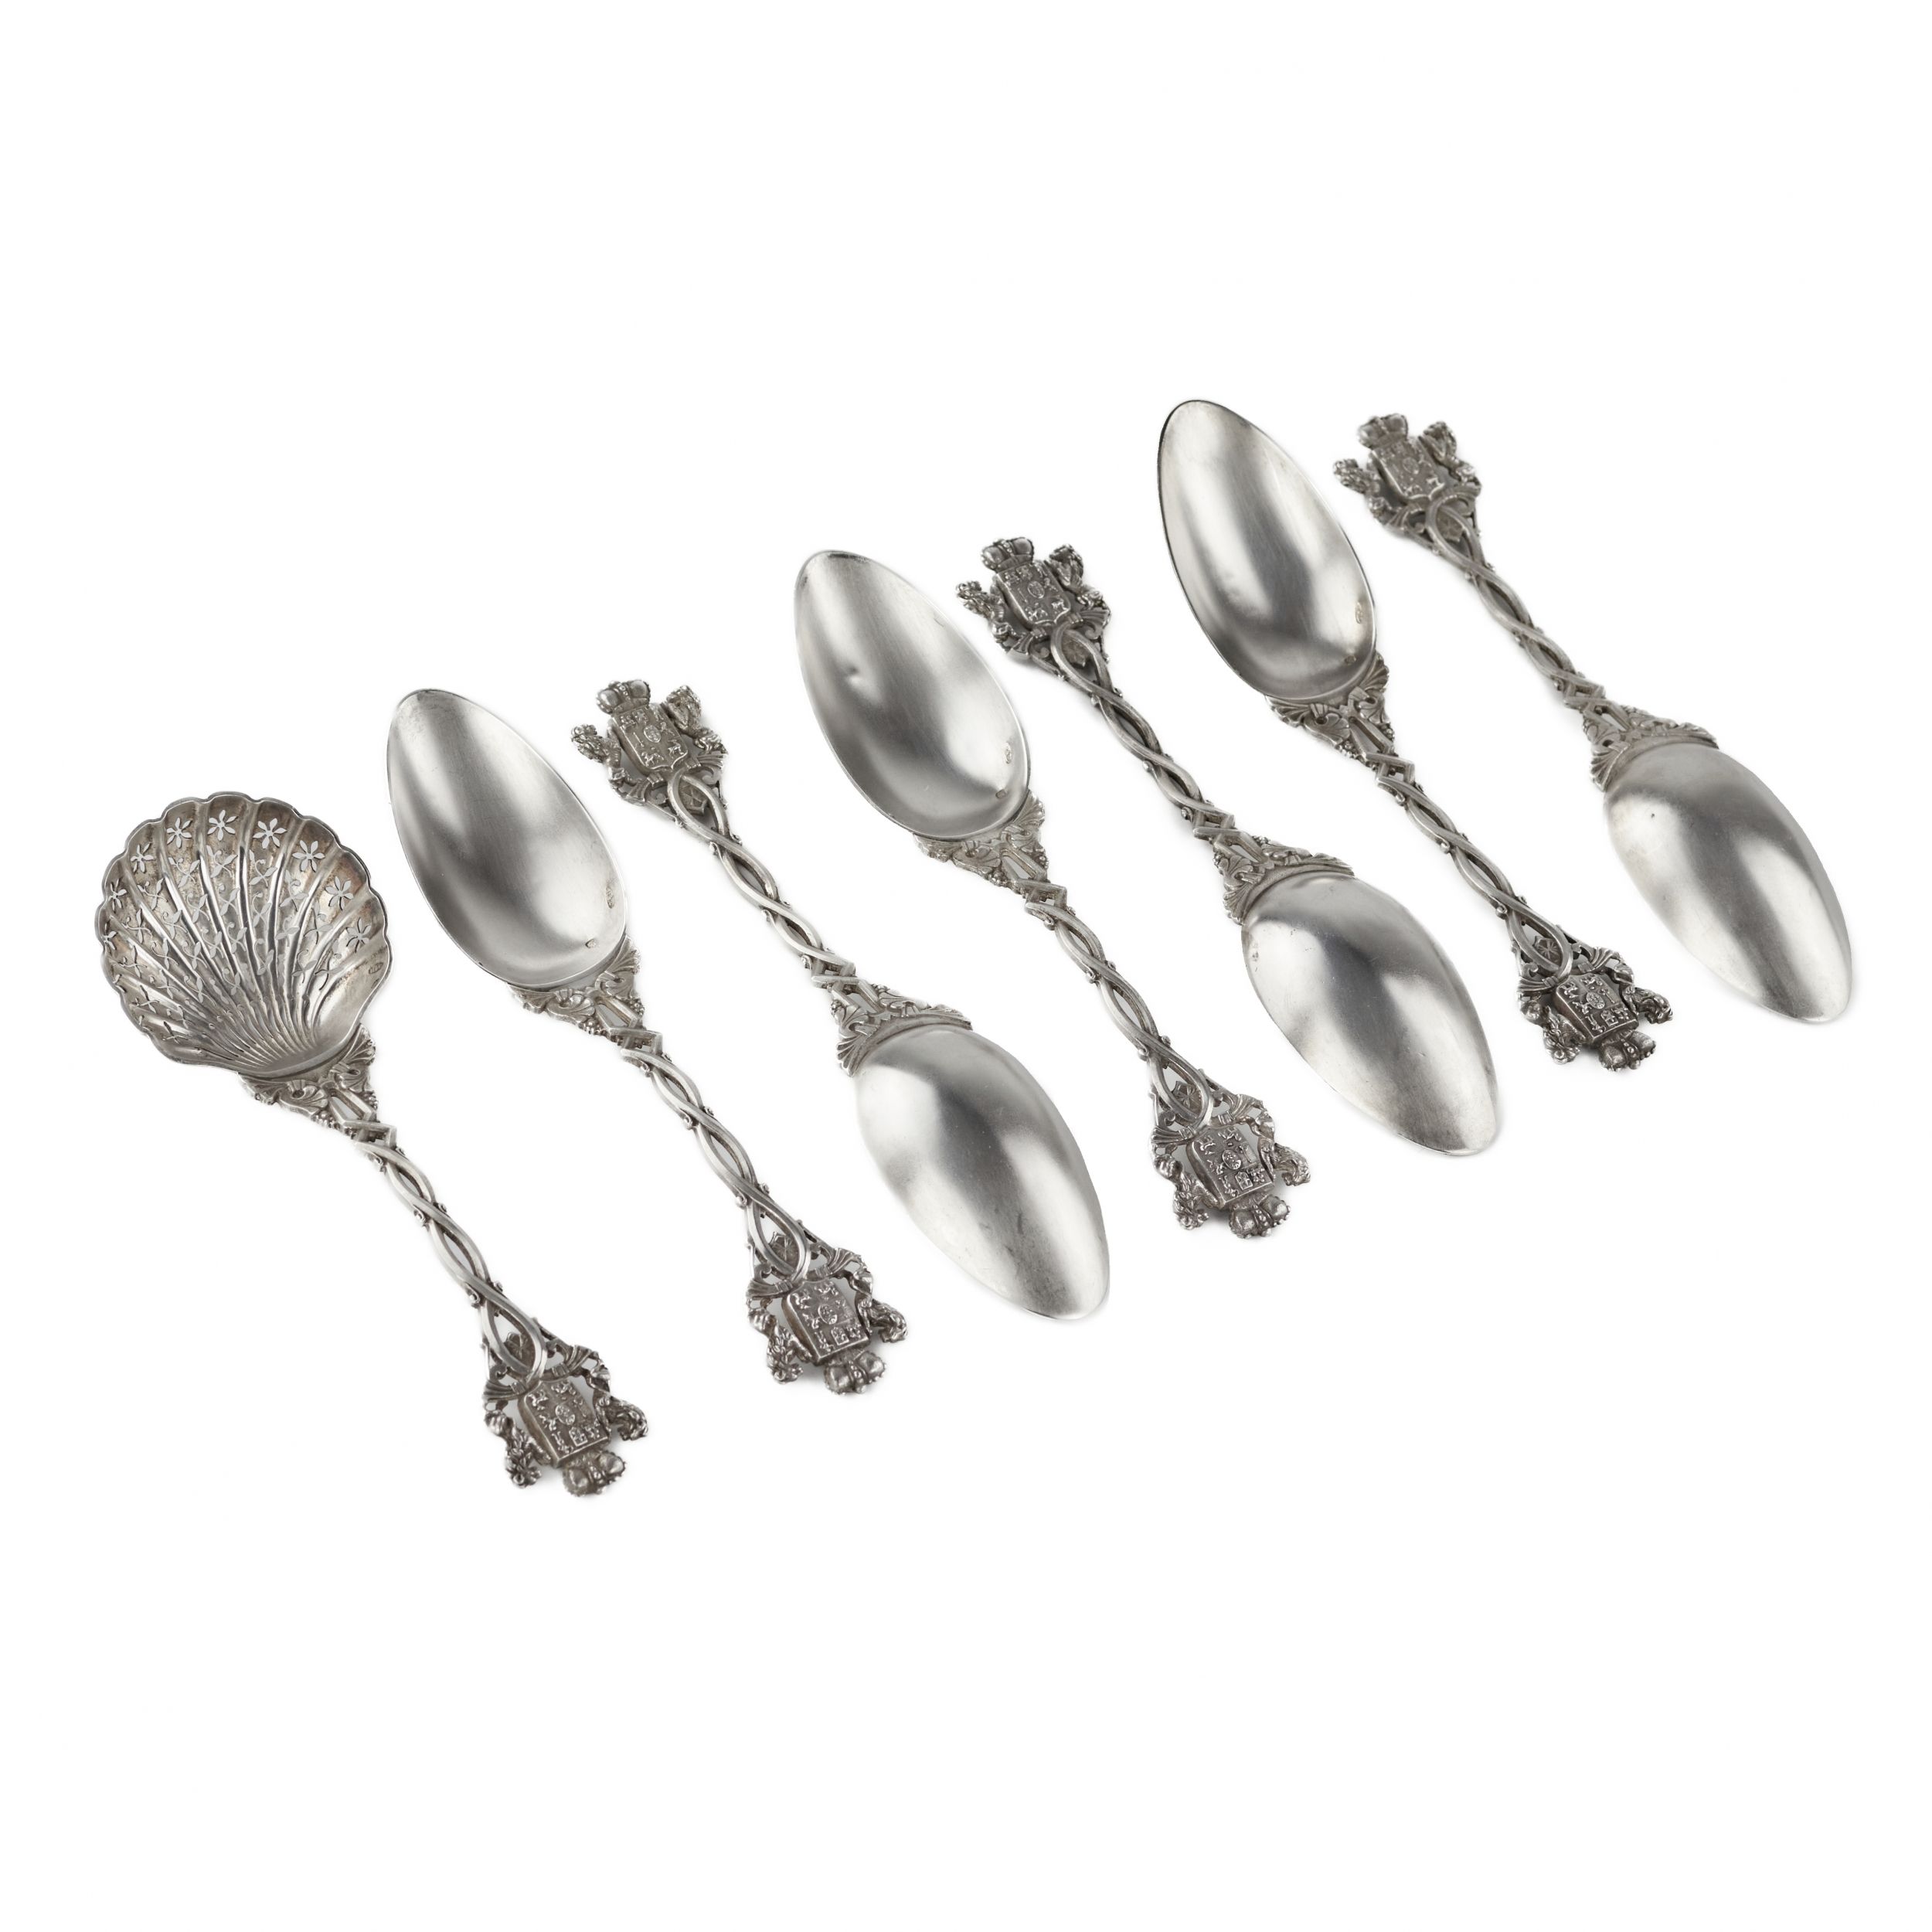 A-set-of-silver-spoons-from-the-Scandinavian-service-of-Prince-Yusupov-Alex-Gueyton-Paris-19th-century-